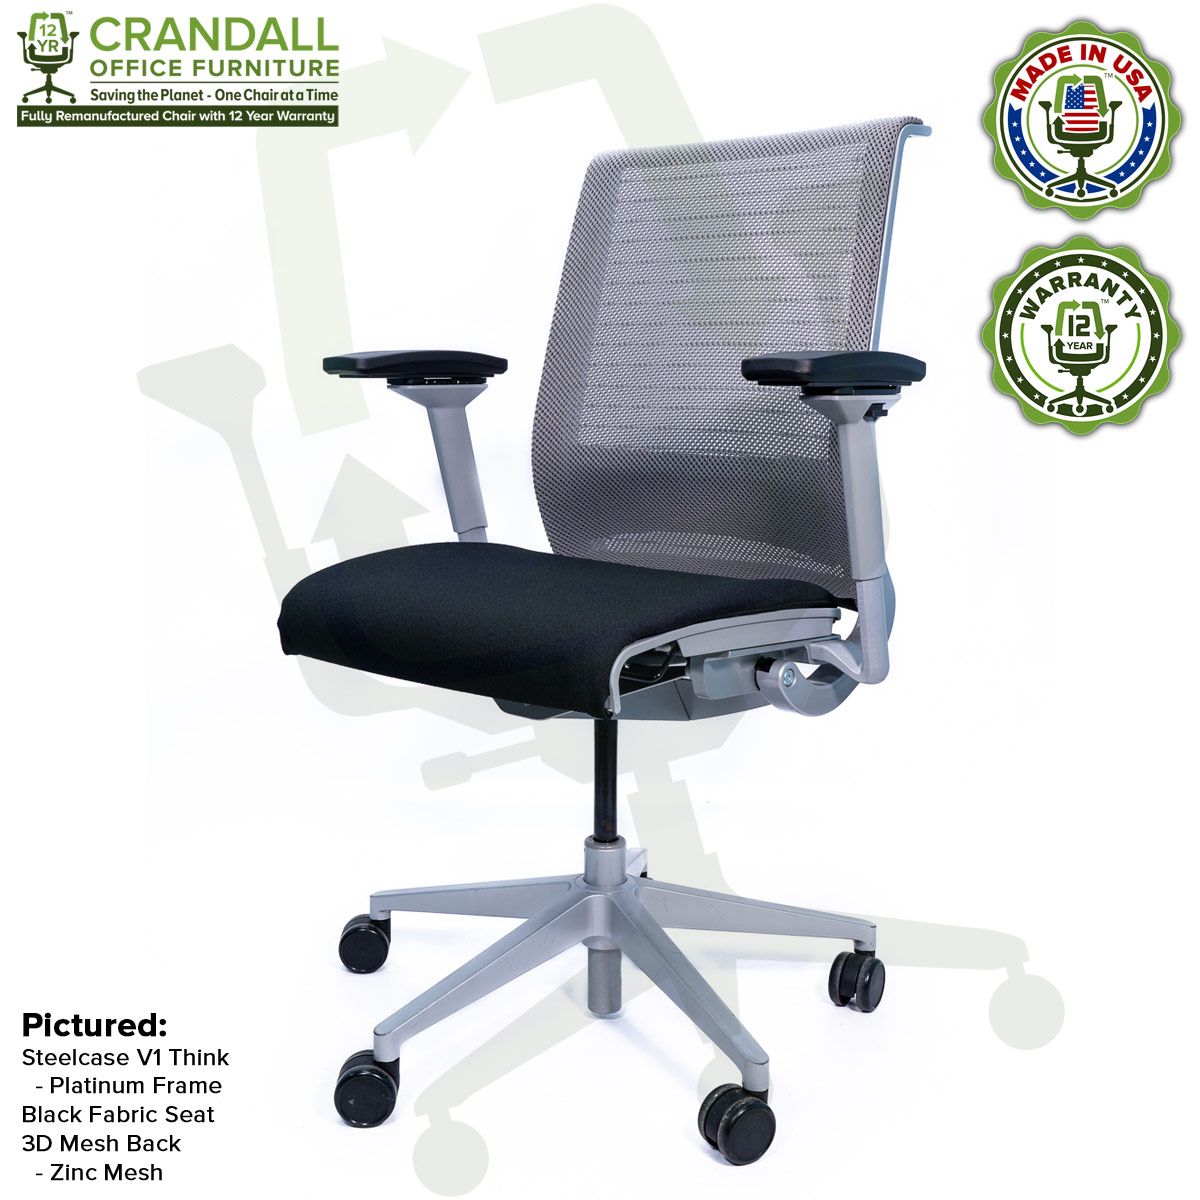 Crandall Office Furniture Remanufactured Steelcase Think Chair with 12 Year Warranty - Platinum Frame - 03